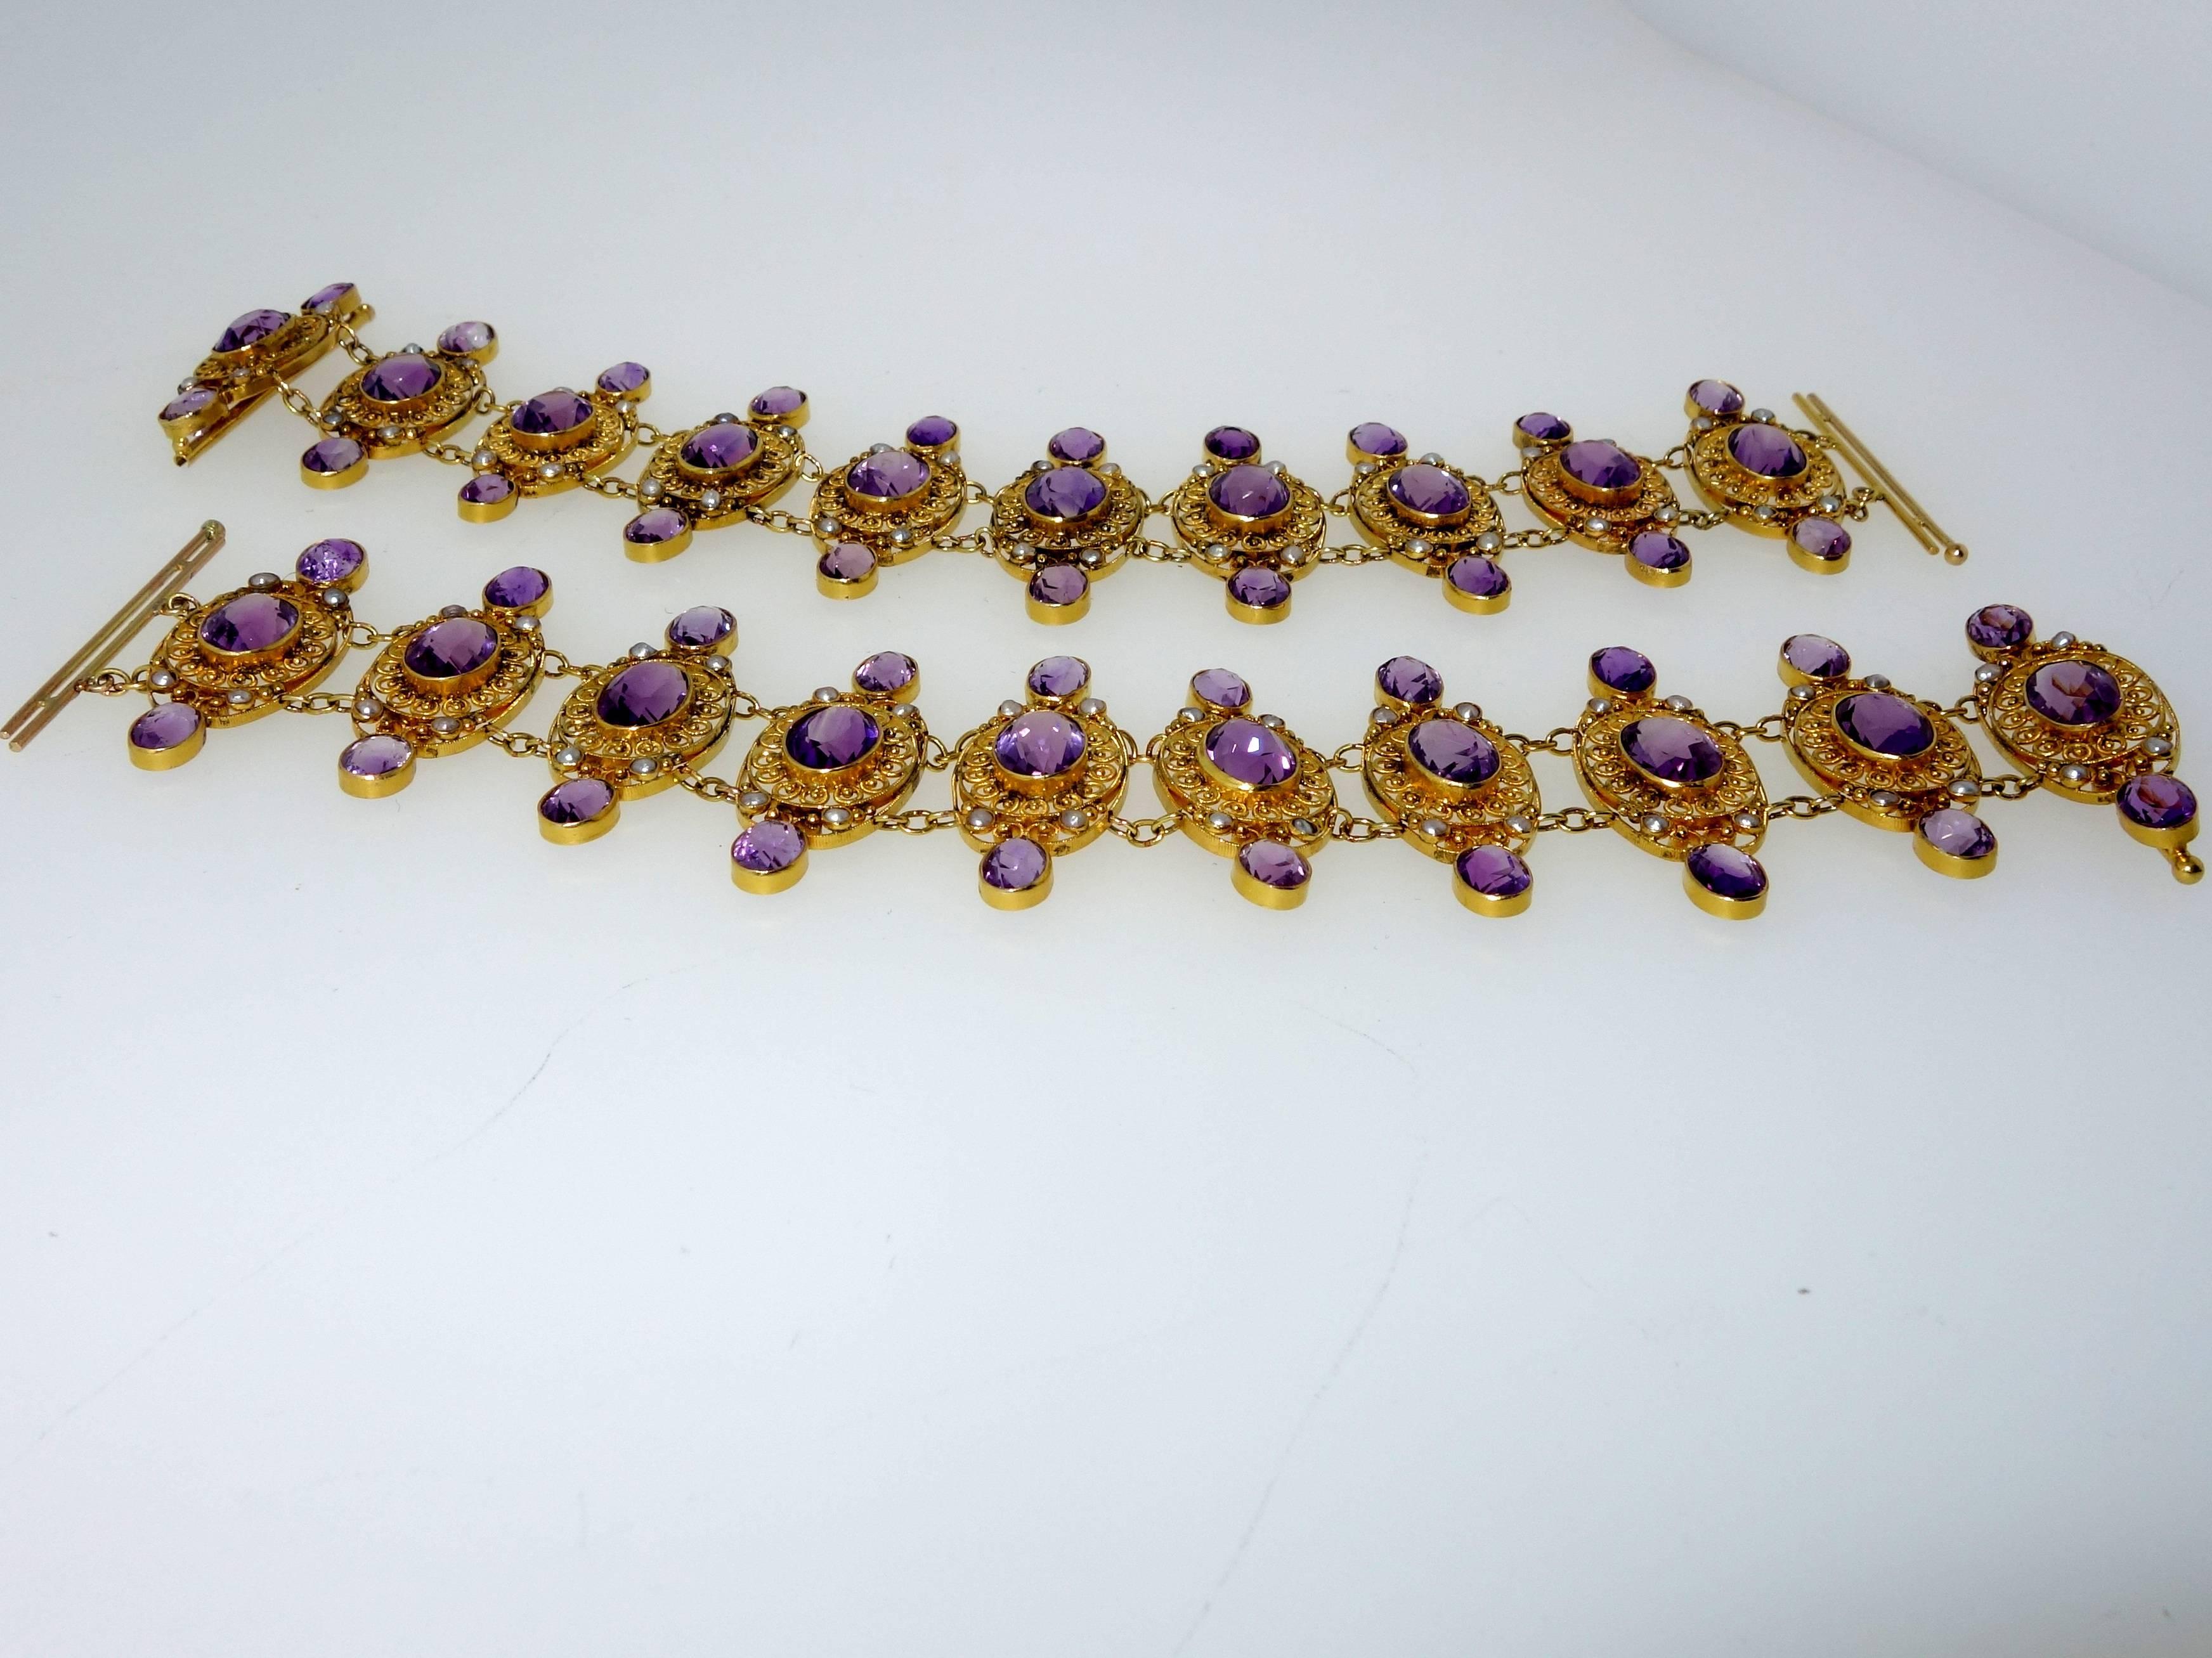 60 fine matched amethysts are set in gold and accented with small natural oriental pearls.  This pair of bracelets, both seven inches in length, can be worn together or on either wrist.  Clasped together and they form a necklace.  Victorian, circa